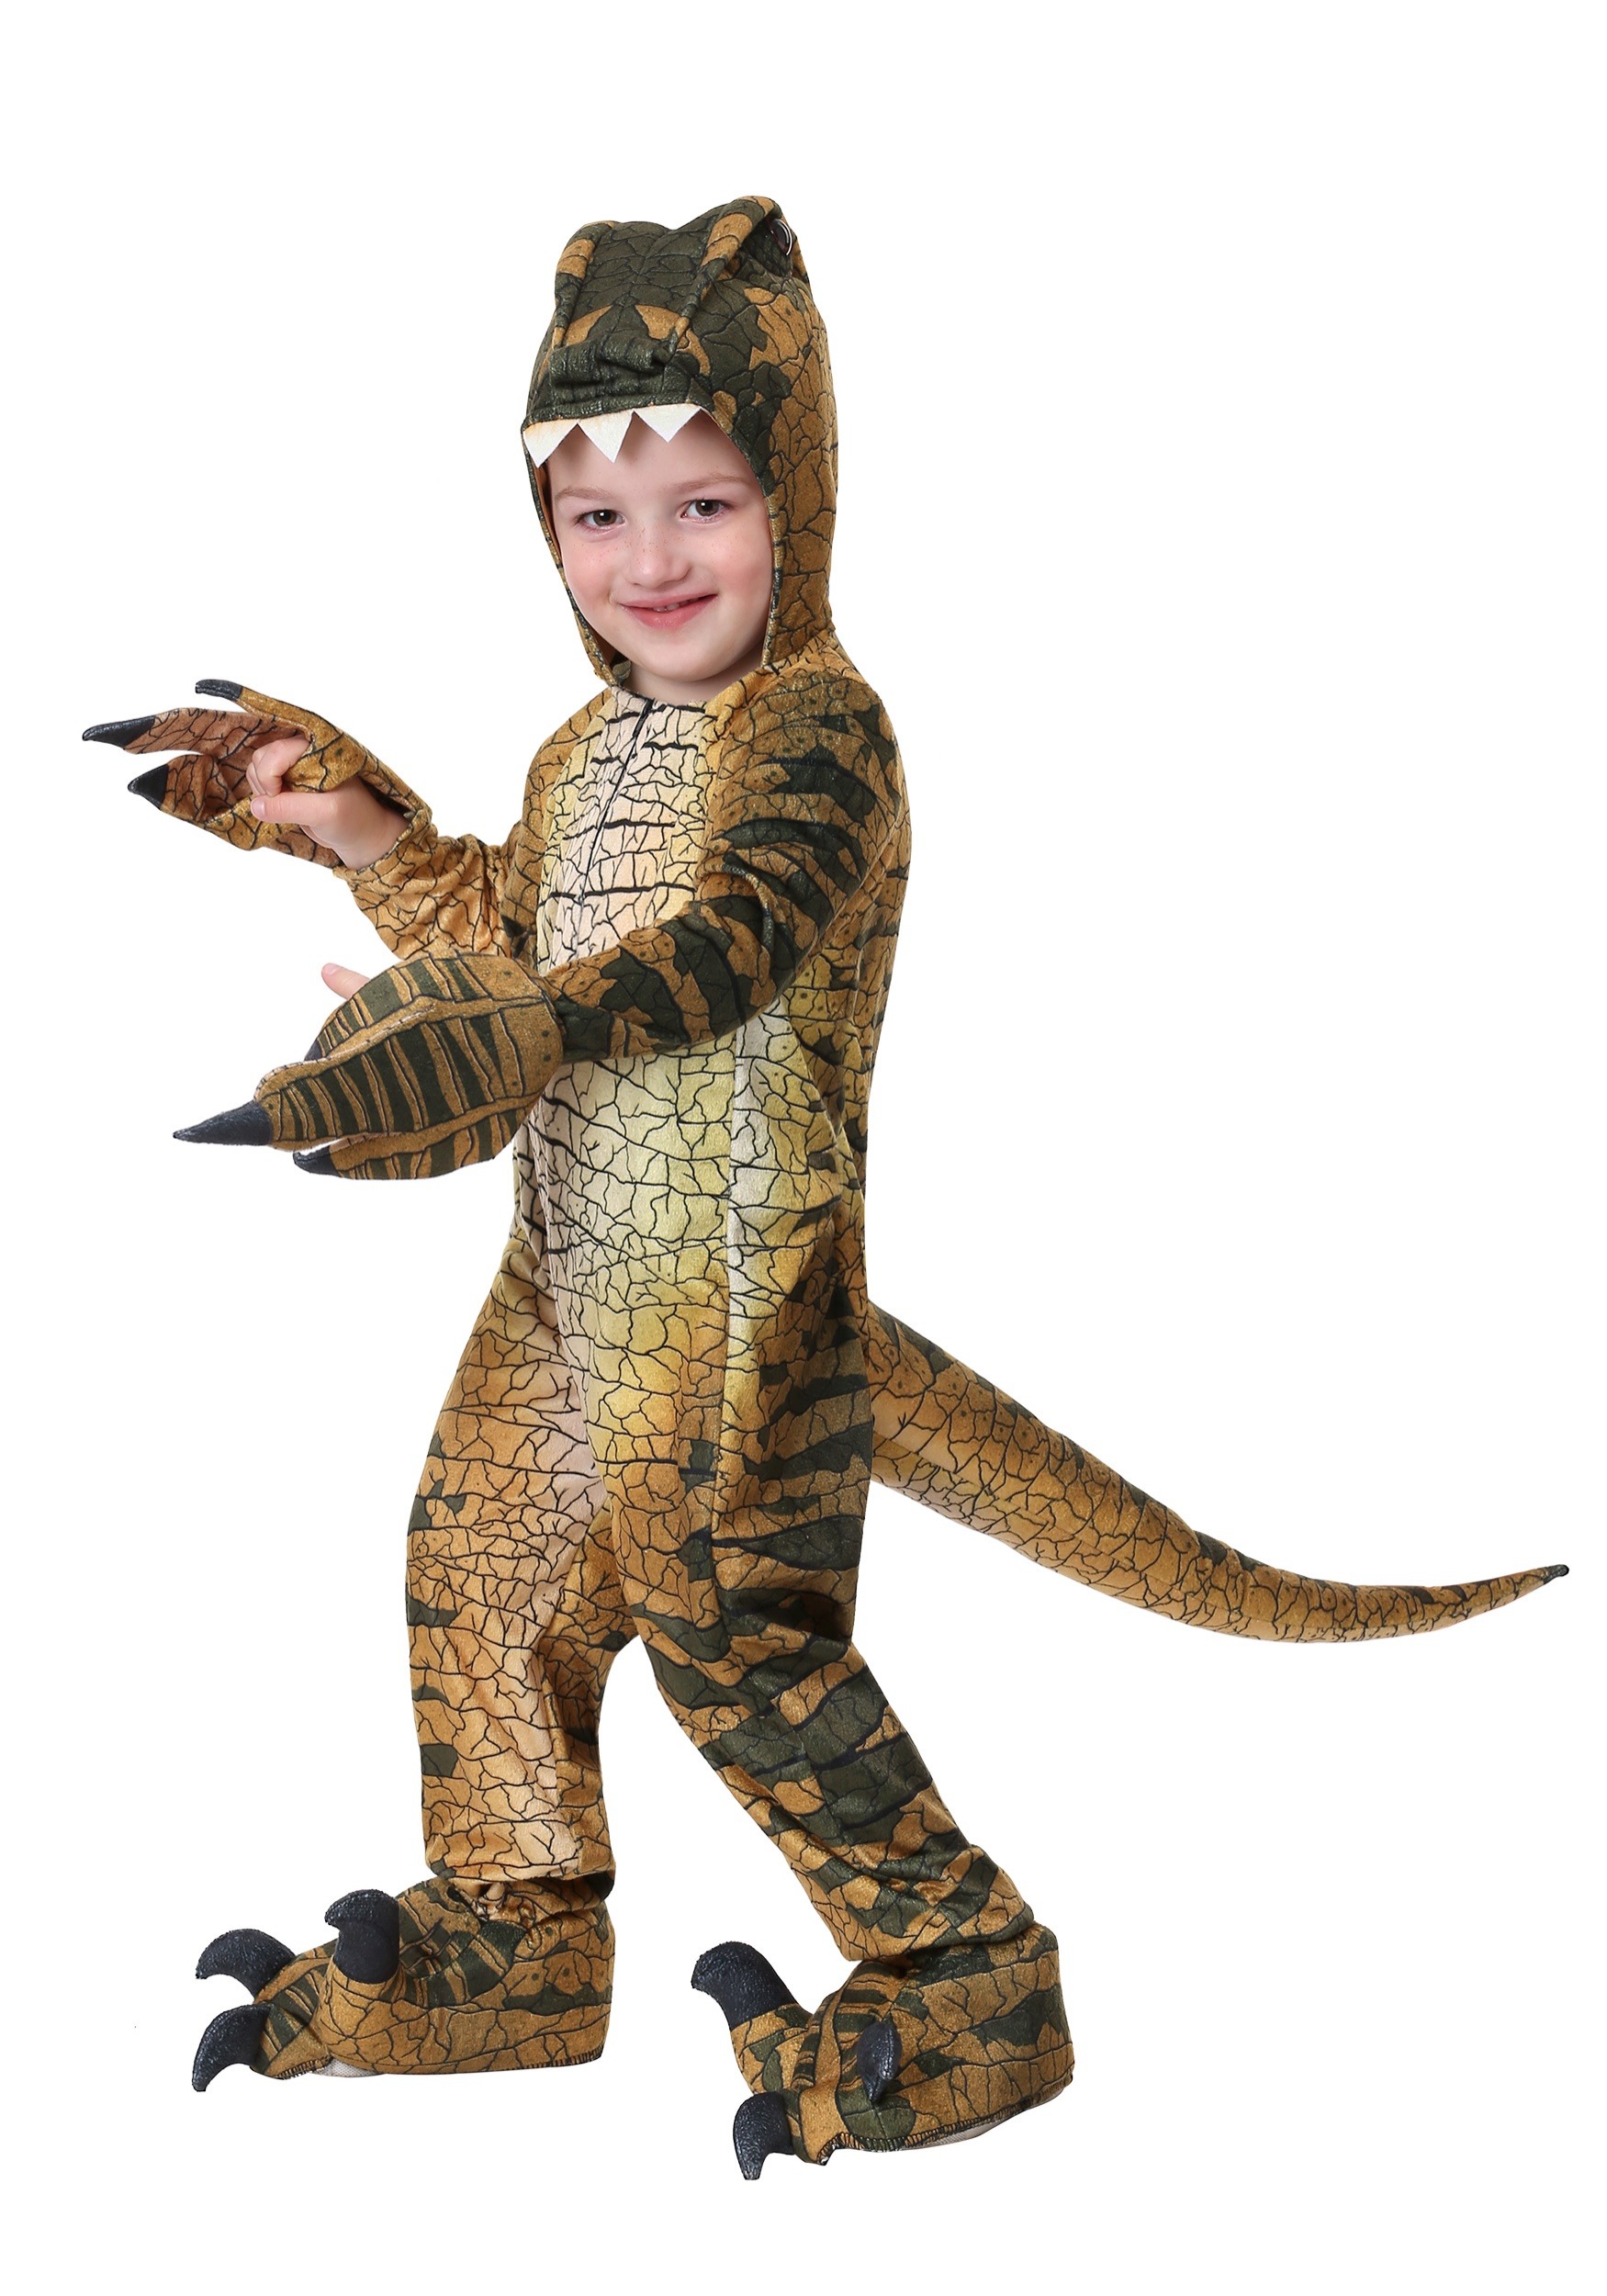 Photos - Fancy Dress Toddler FUN Costumes Velociraptor Costume for Toddlers Brown/Yellow/Green 